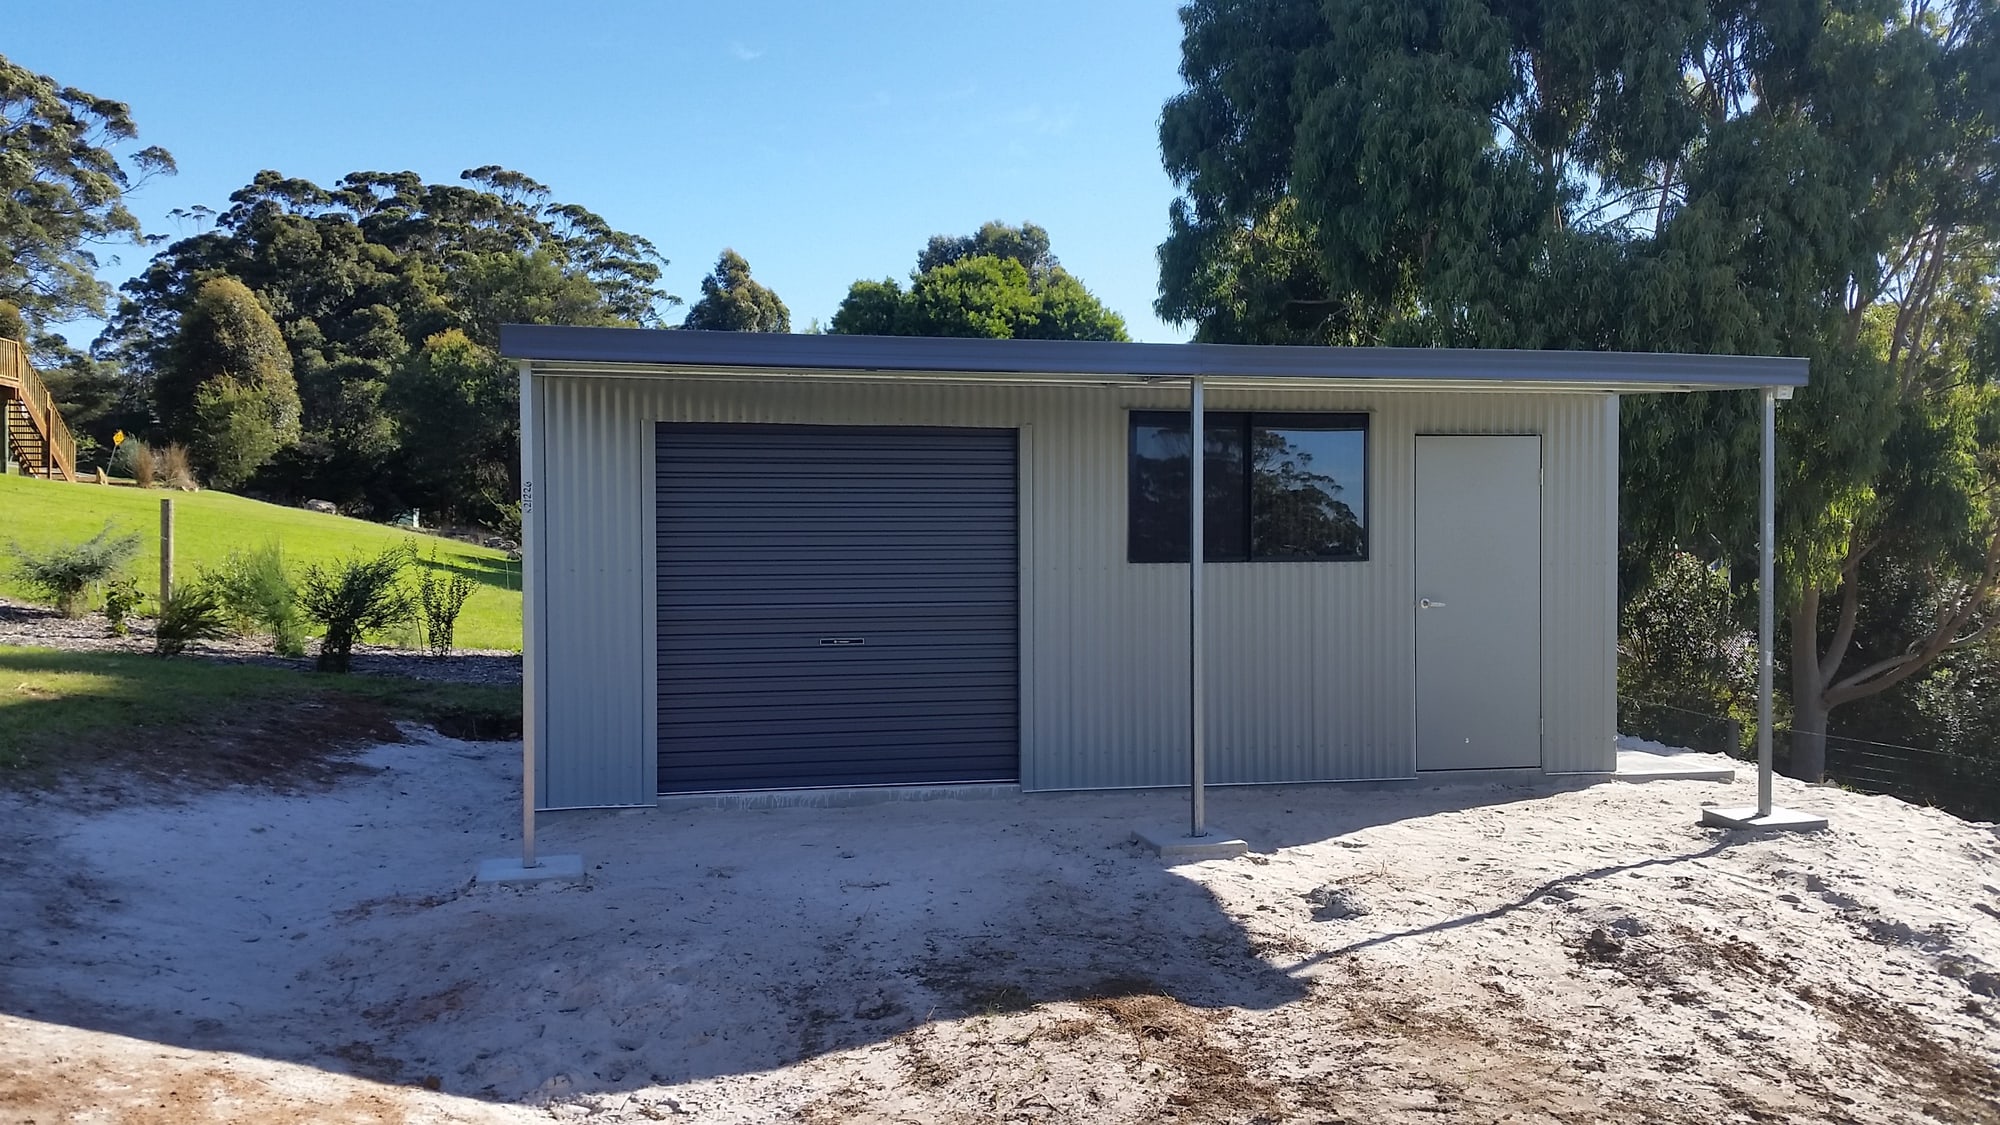 Sheds | Ranbuild Great Southern